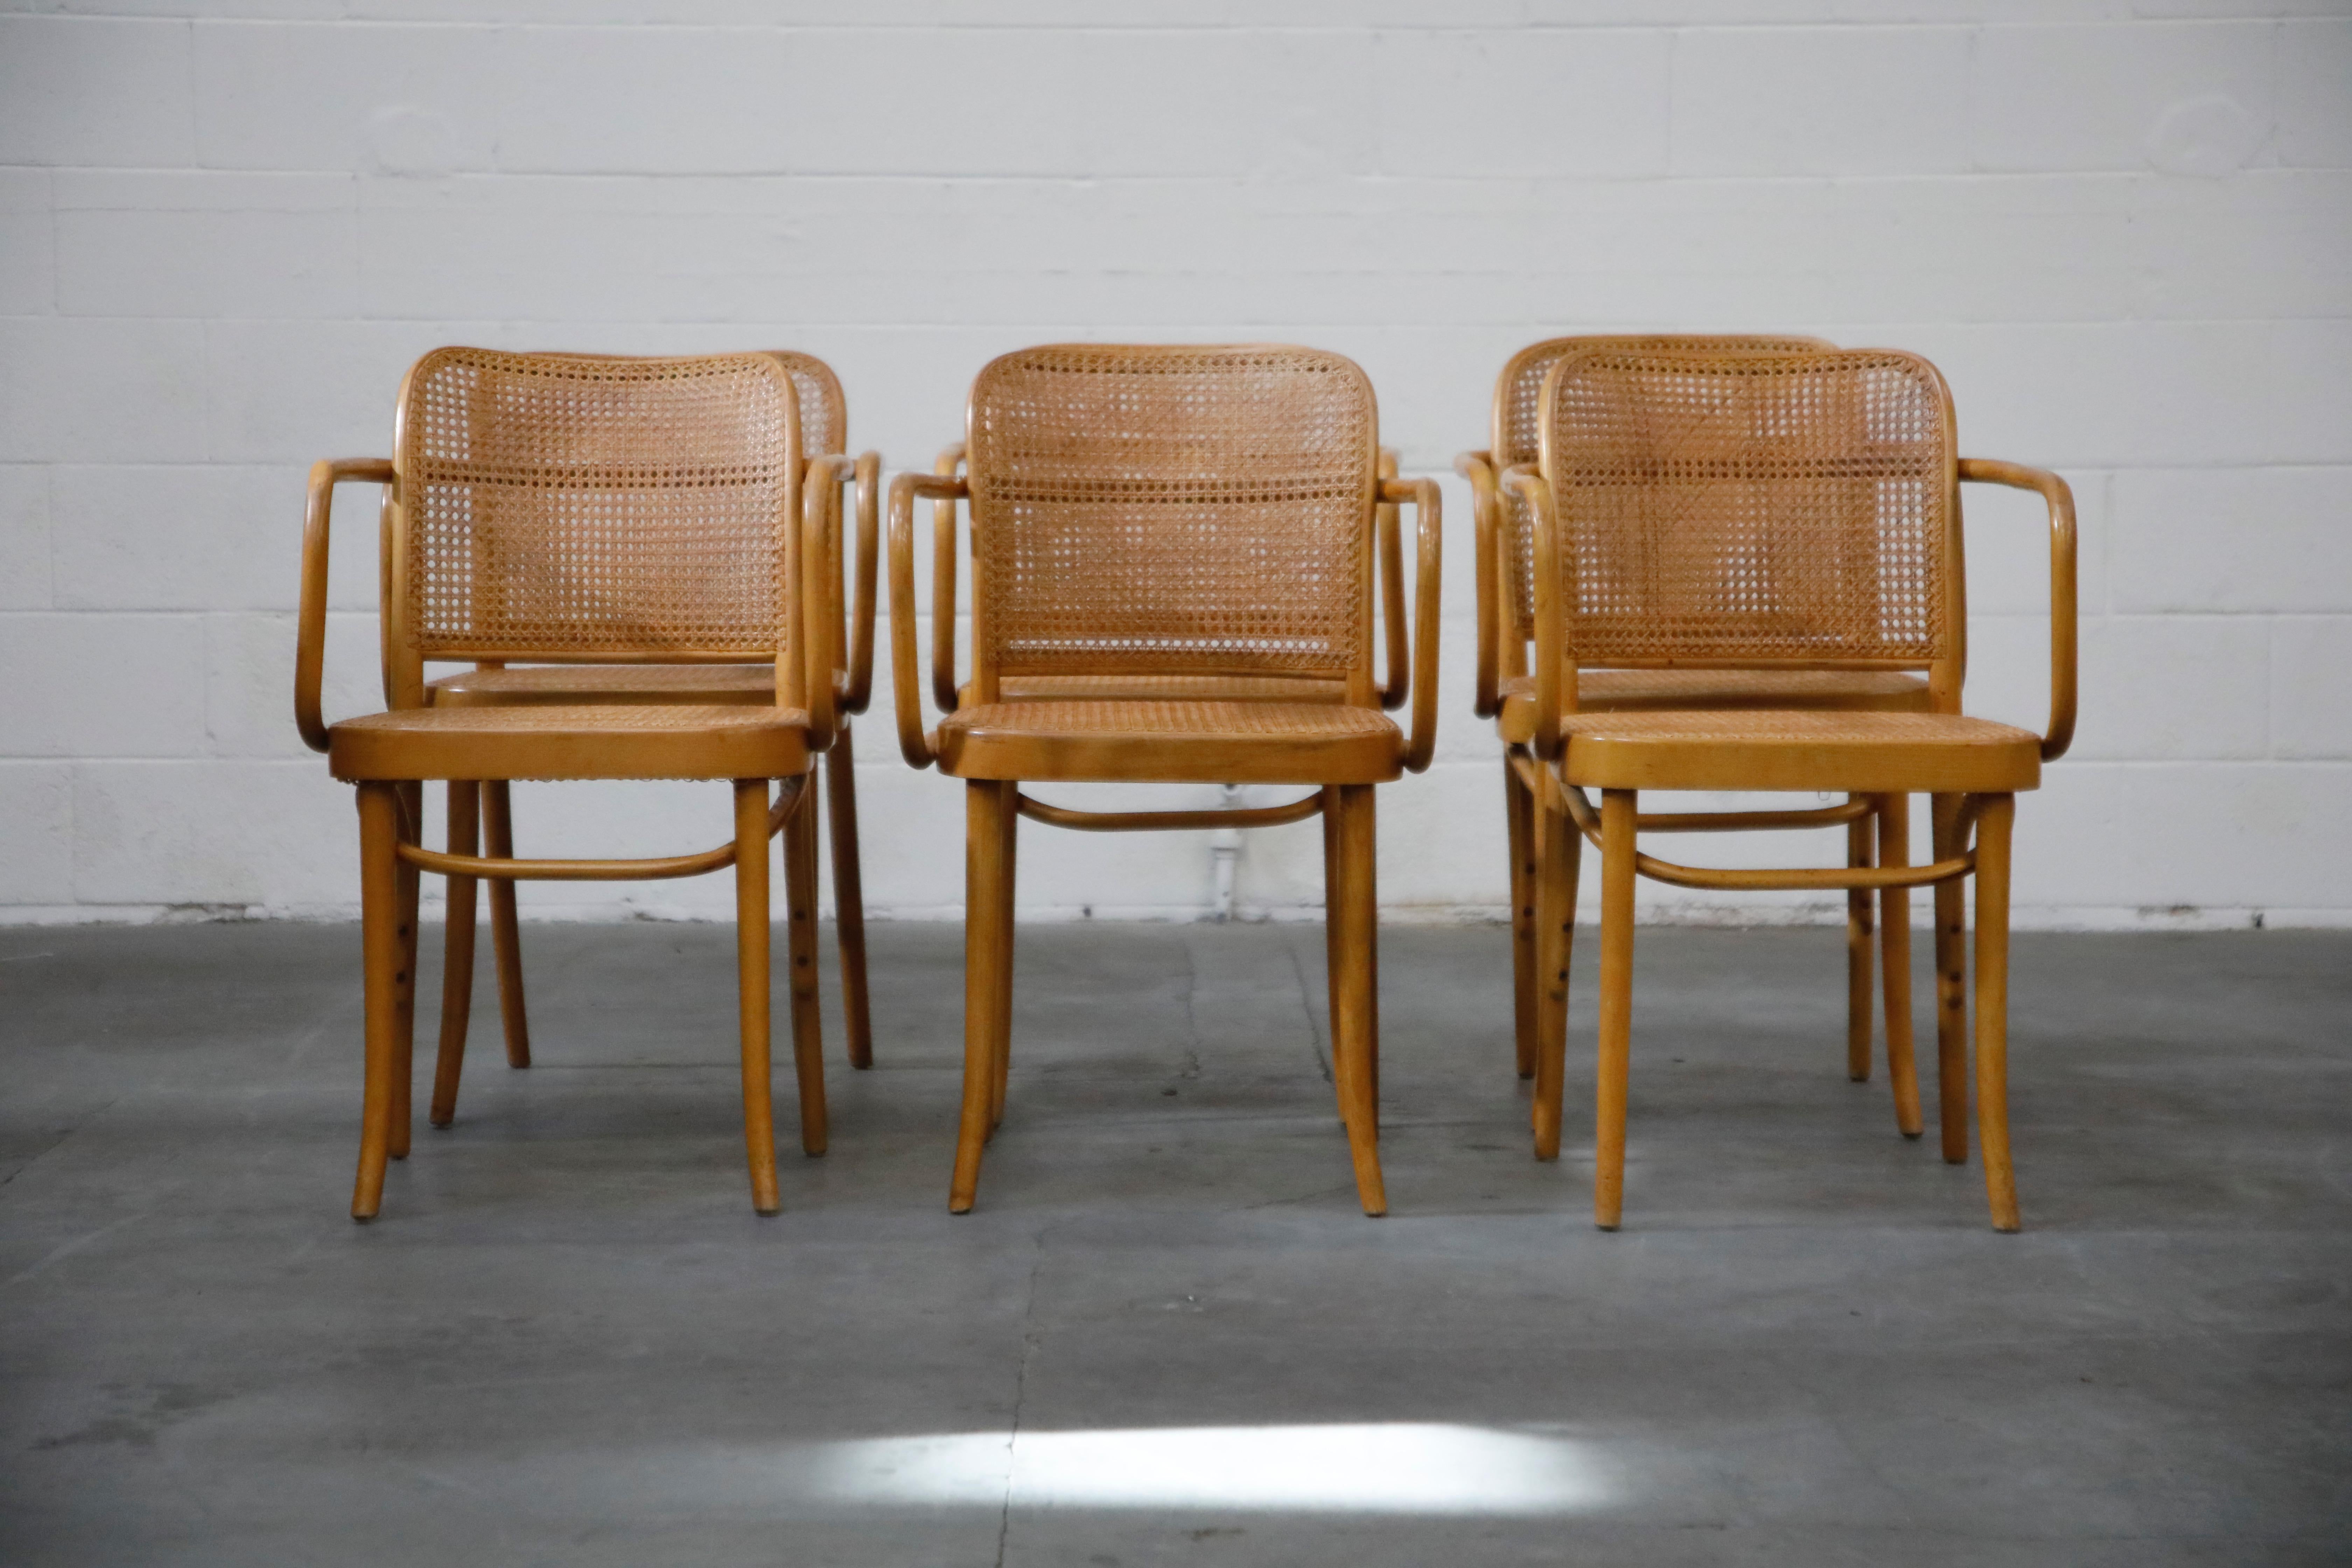 An amazing authentic set of six (6) iconic 'Prague' bentwood dining chairs by Josef Frank and Josef Hoffmann, circa 1960s, featuring bentwood birch frames with gorgeous caned seats and seat backs, each stamped on the underside of the seat with Made